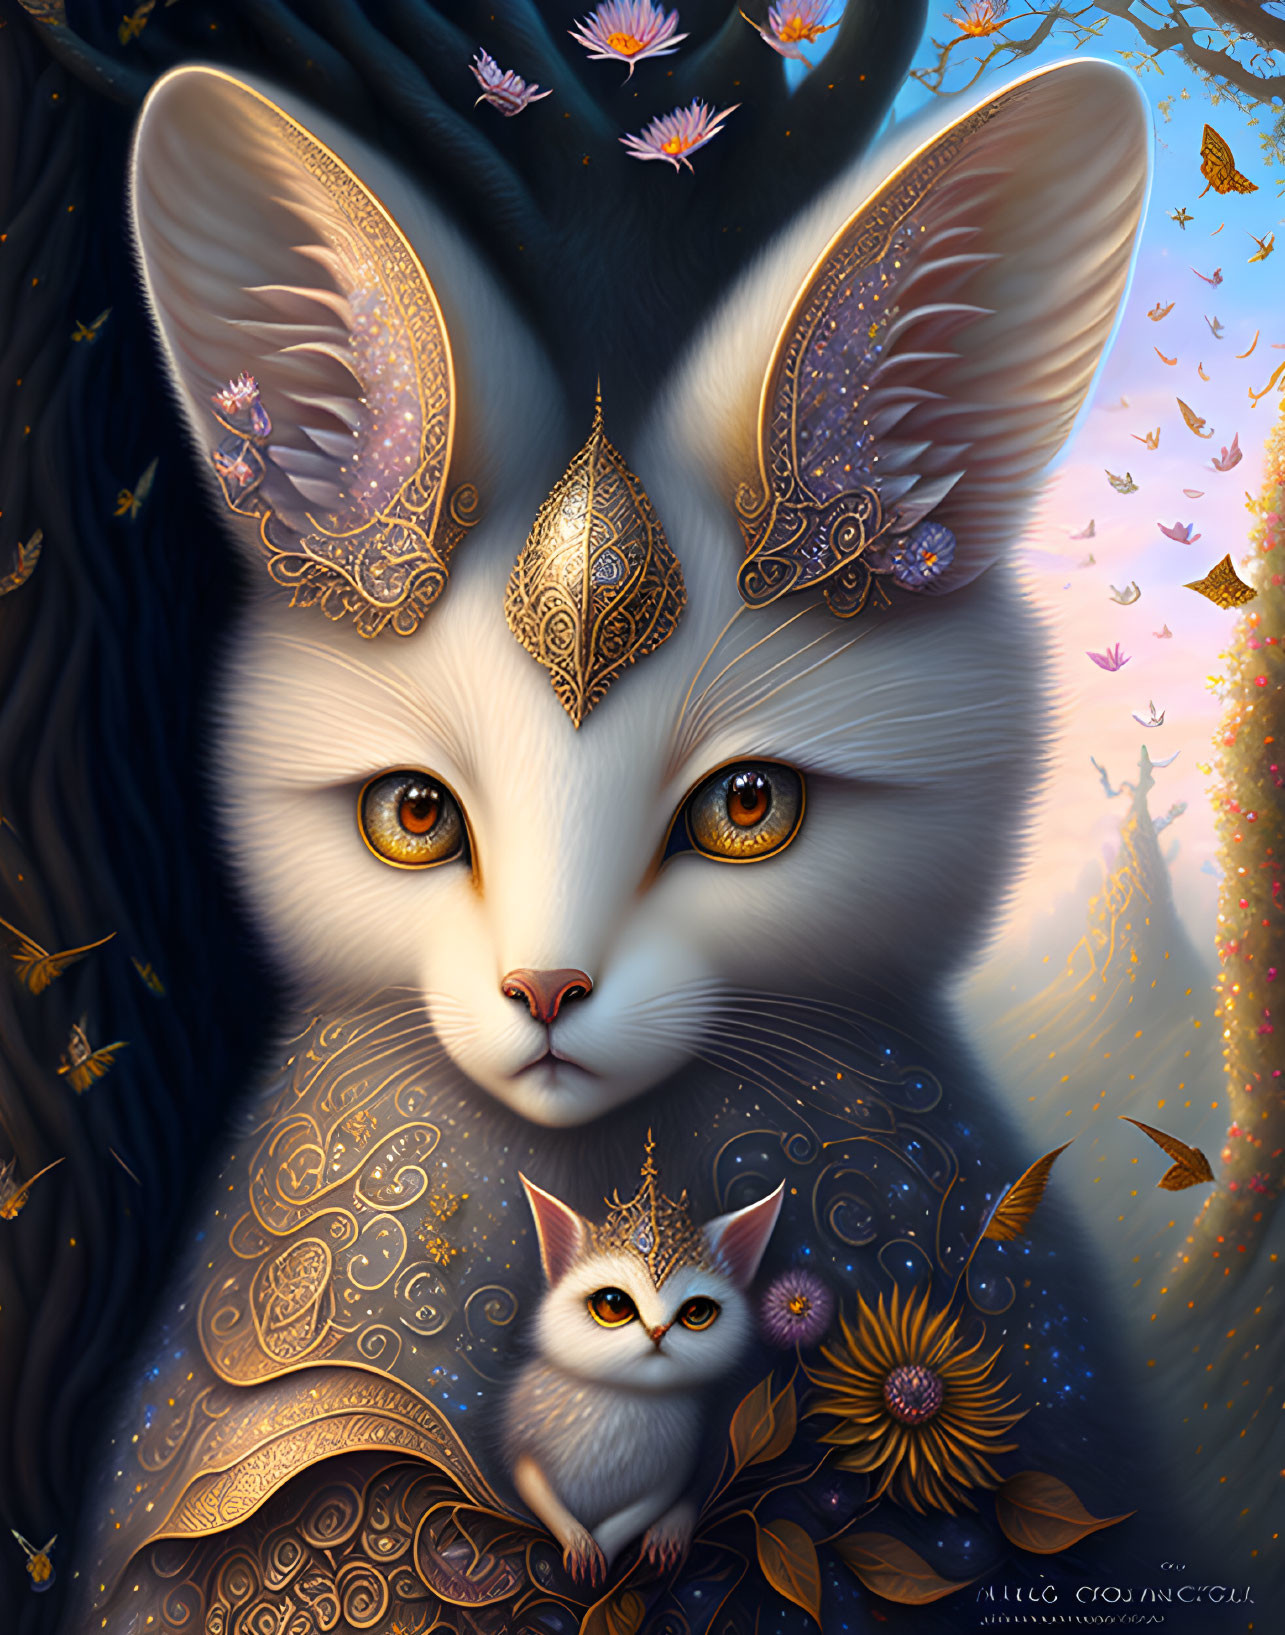 Detailed mystical cats with golden embellishments in twilight setting.